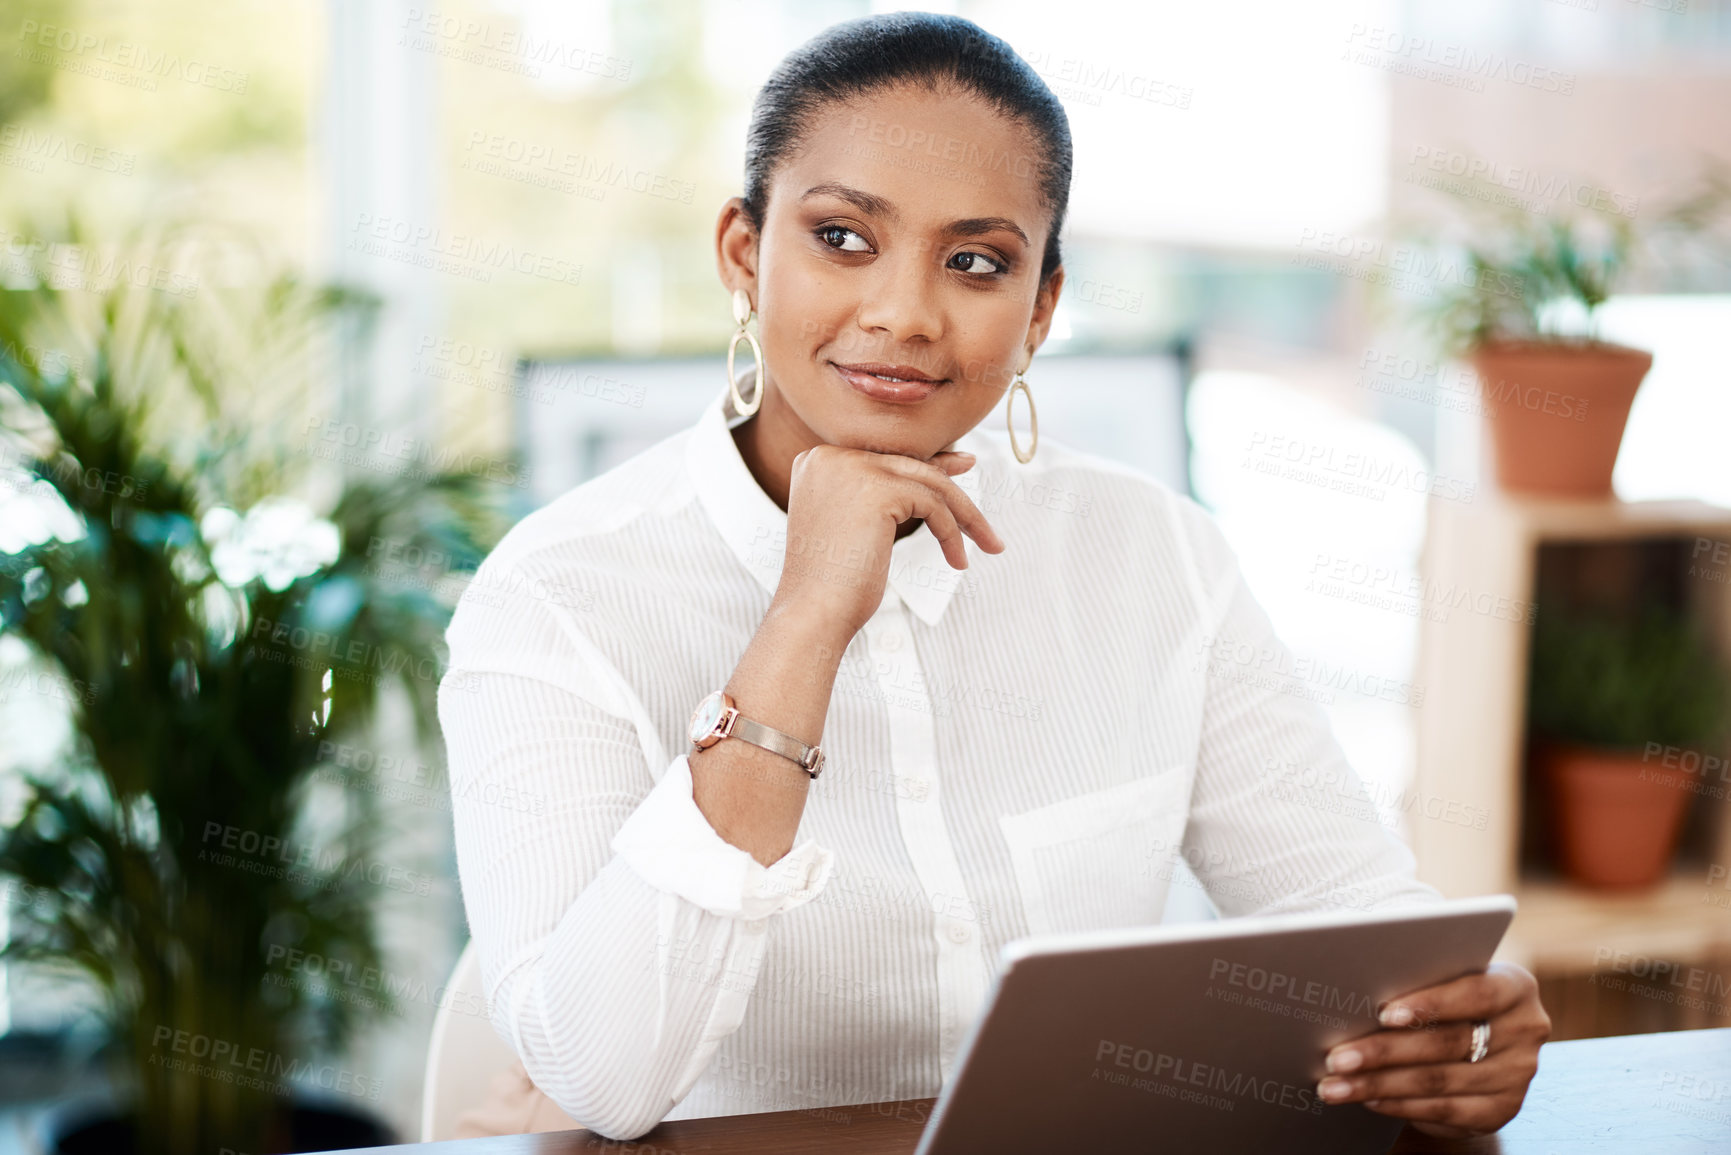 Buy stock photo Shot of a young businesswoman using a digital tablet in a modern office